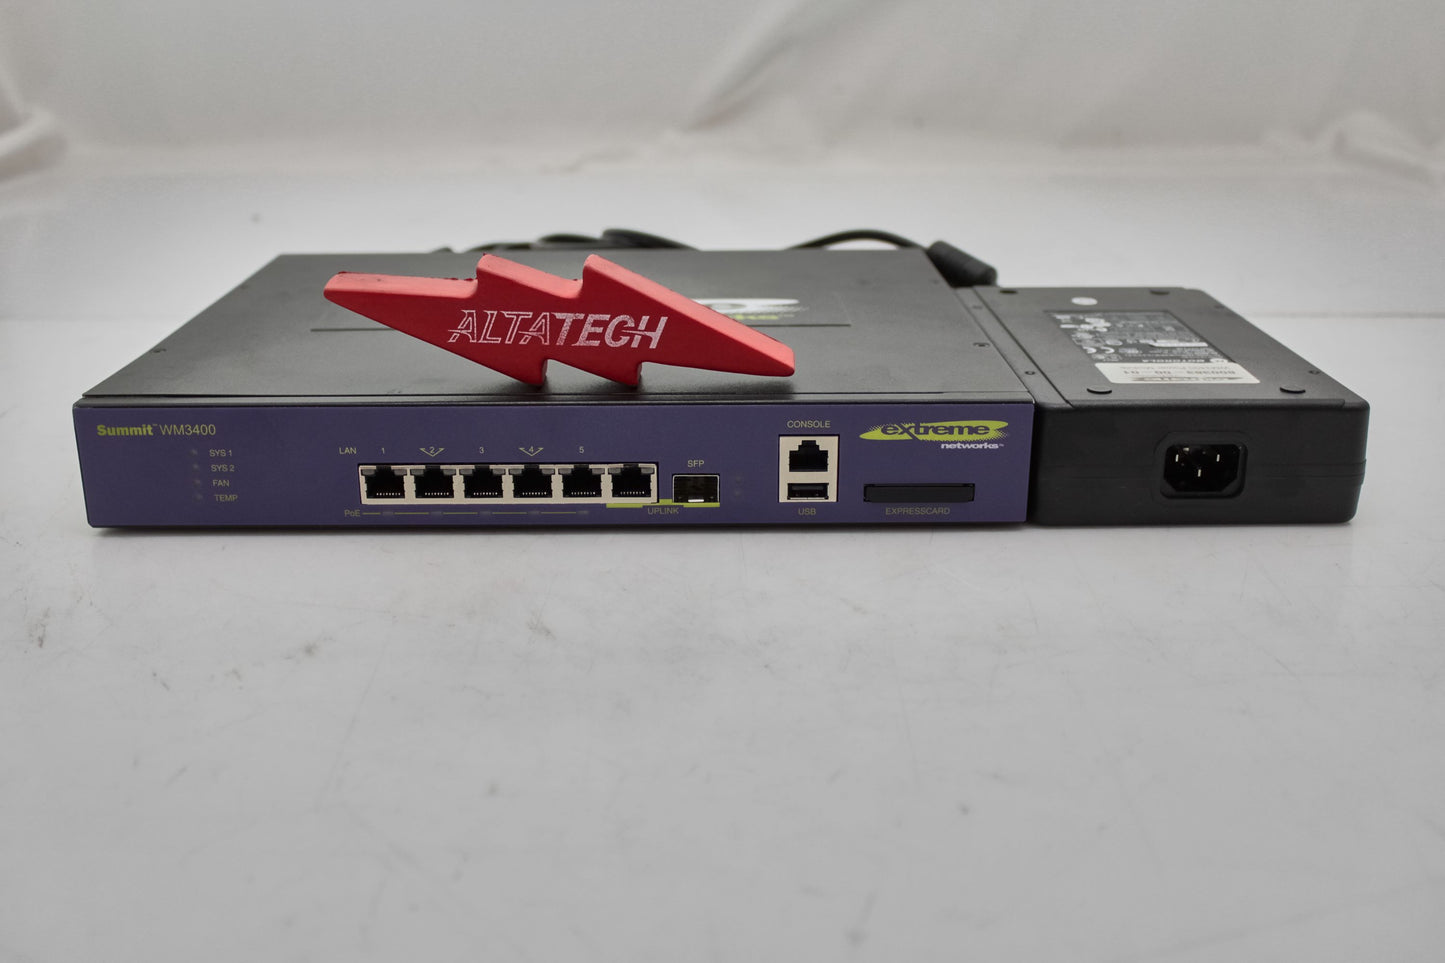 Extreme WM3400 WLAN Controller 15717, Used